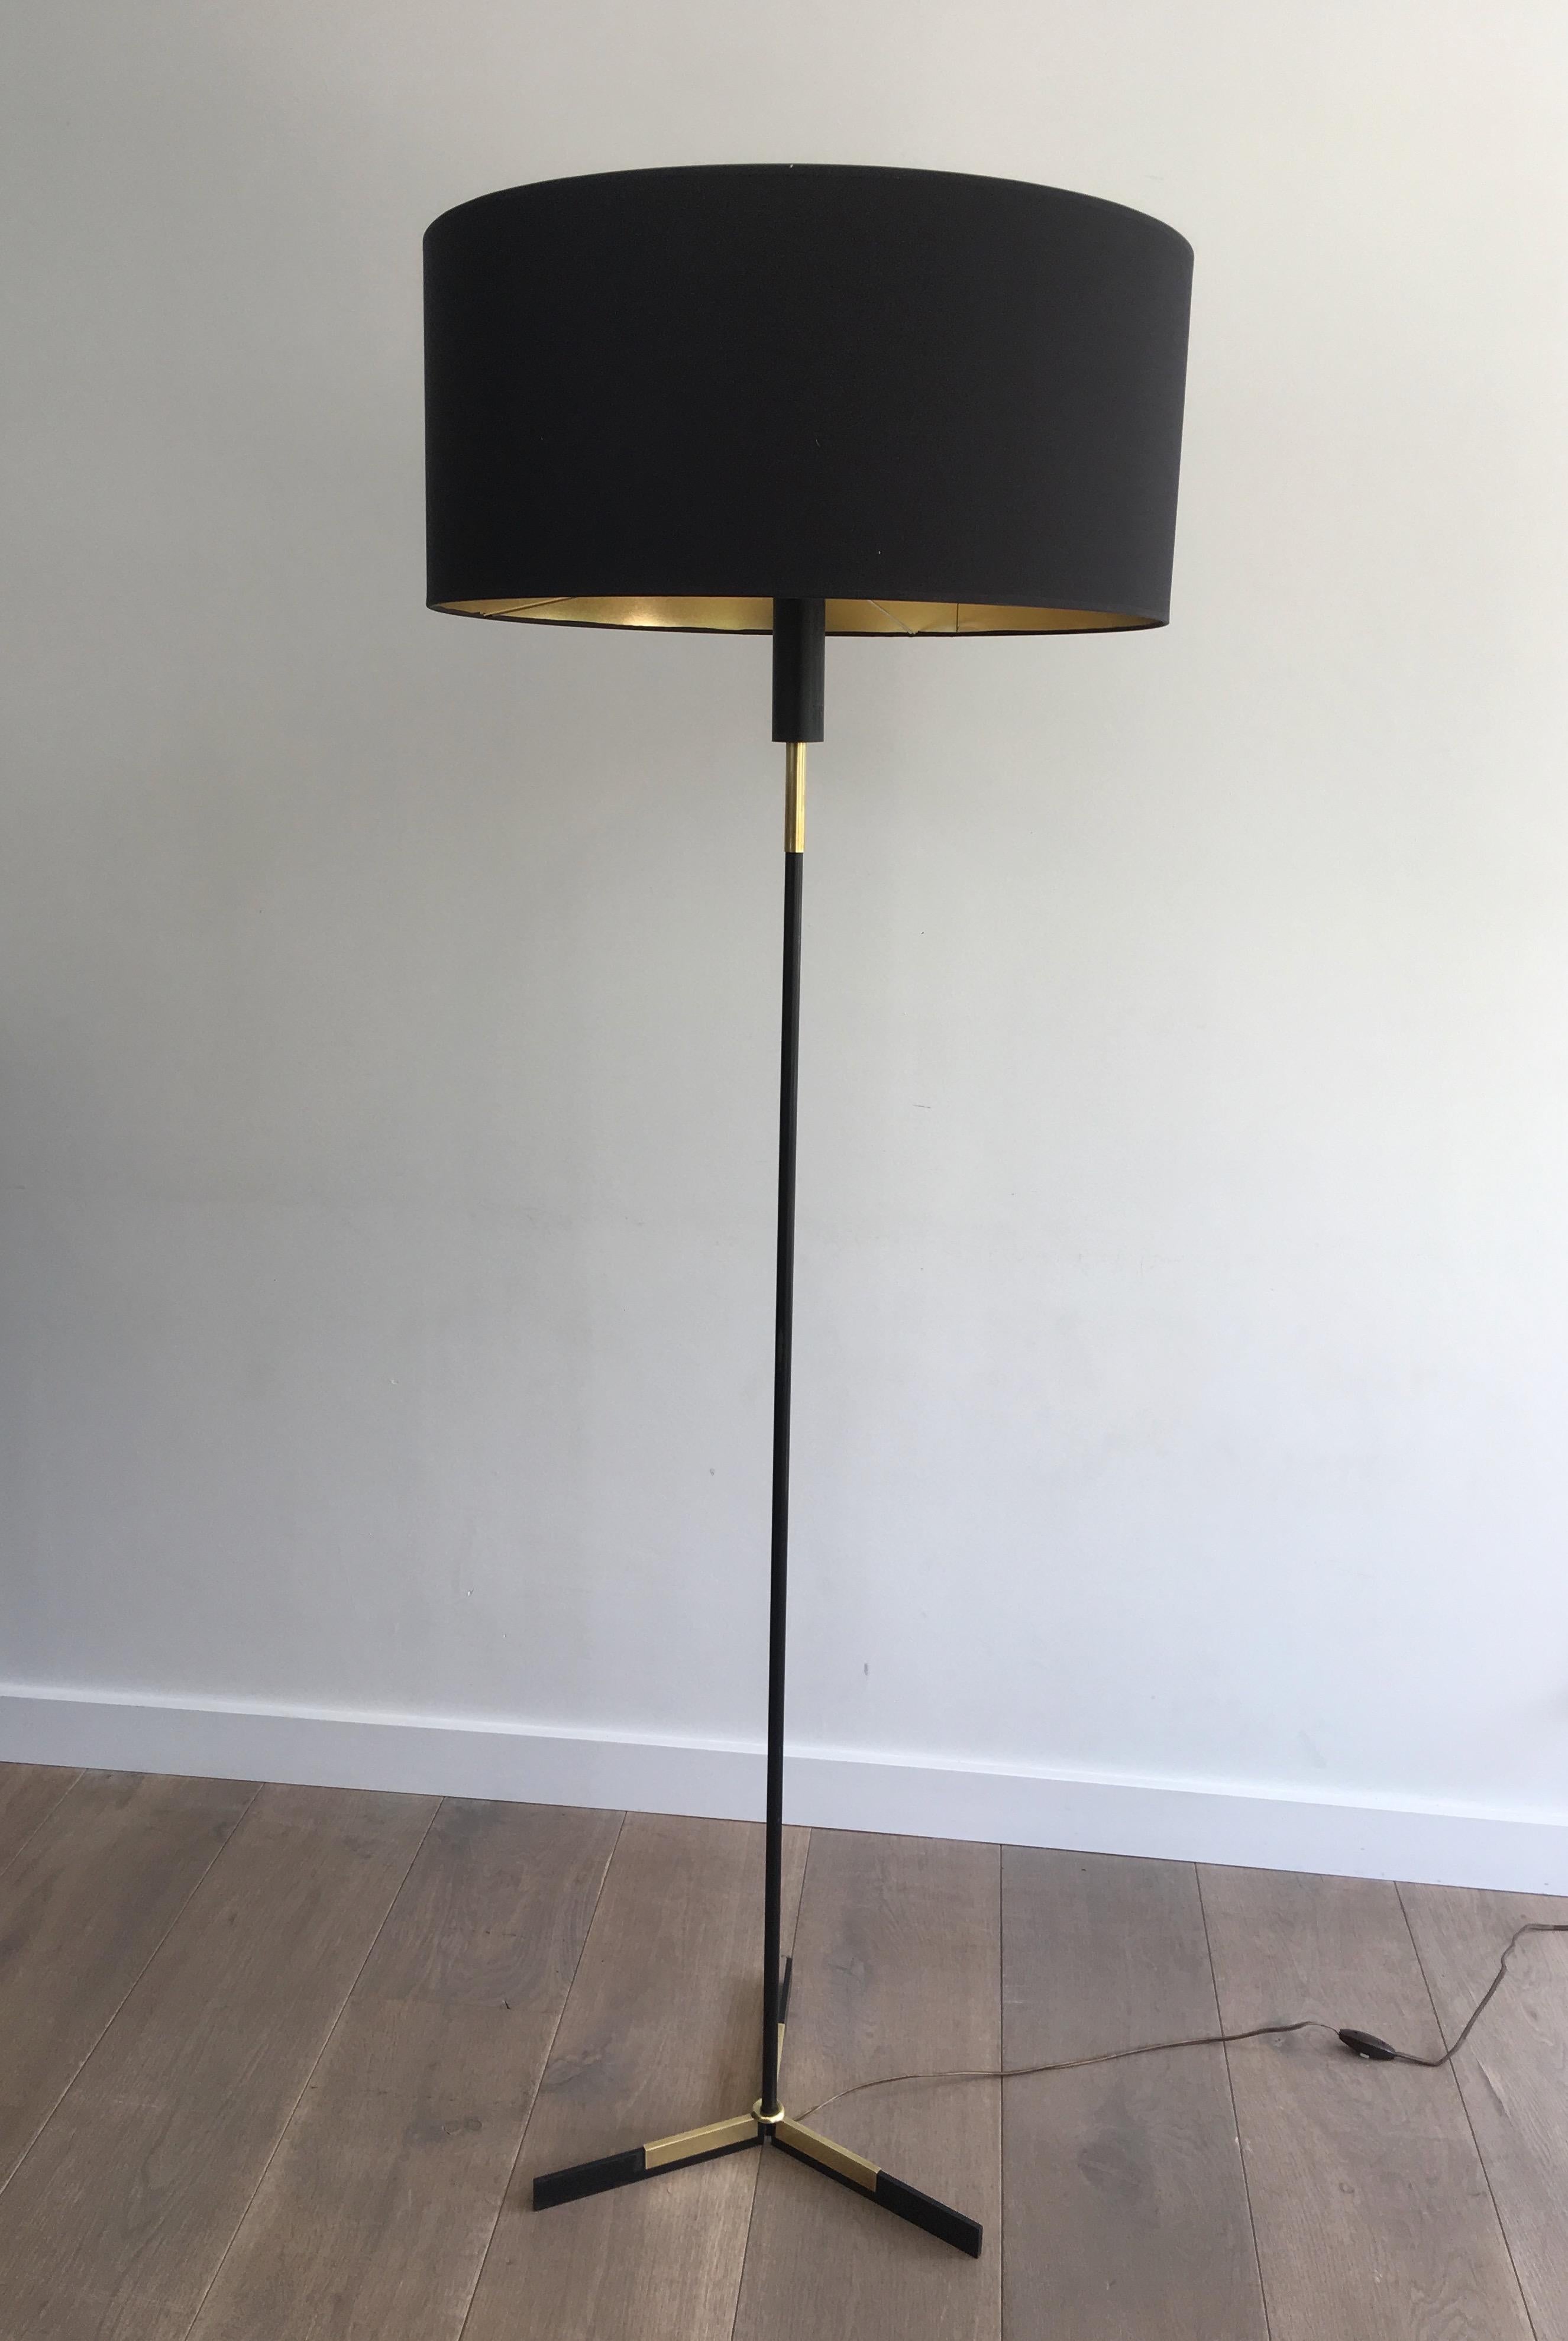 Black Lacquered and Brass Design Floor Lamp, French, circa 1950 For Sale 9